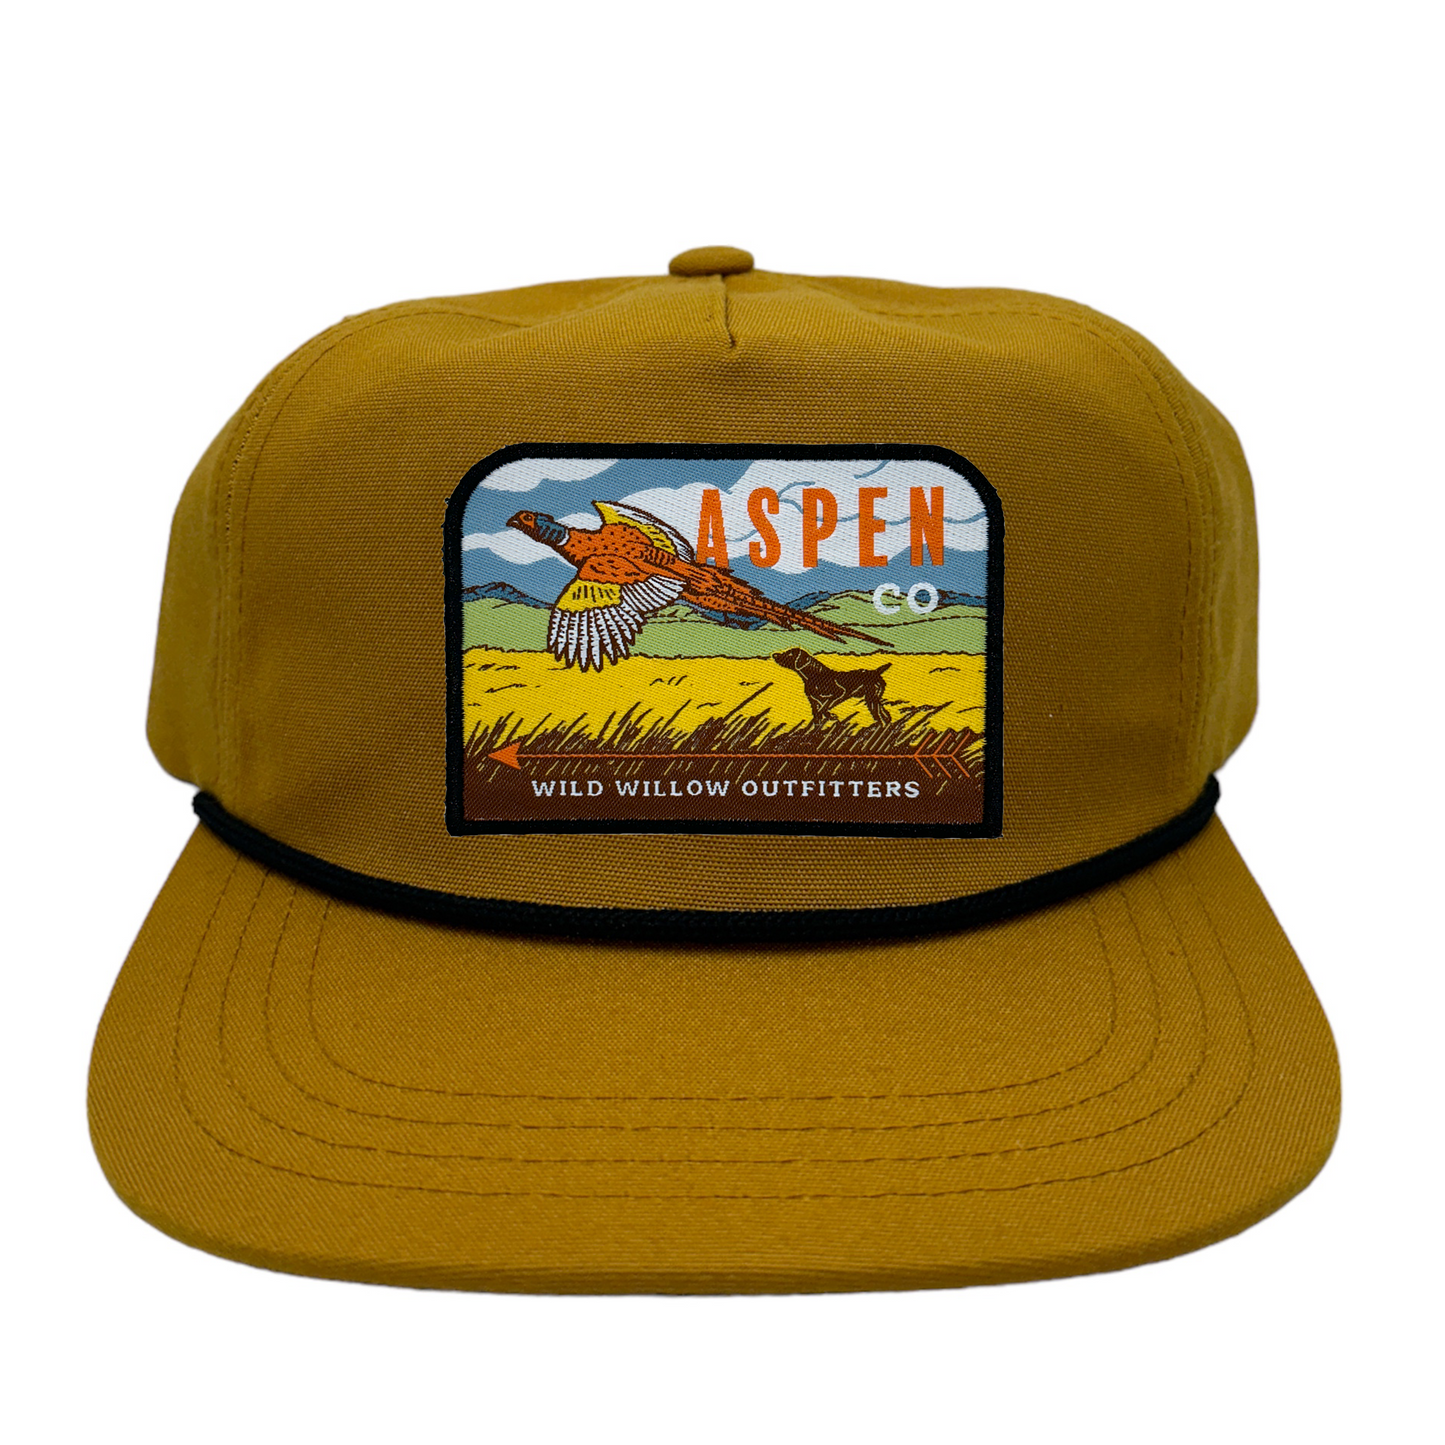 Wild Willow Outfitters Hunting - Aspen, CO Snapback